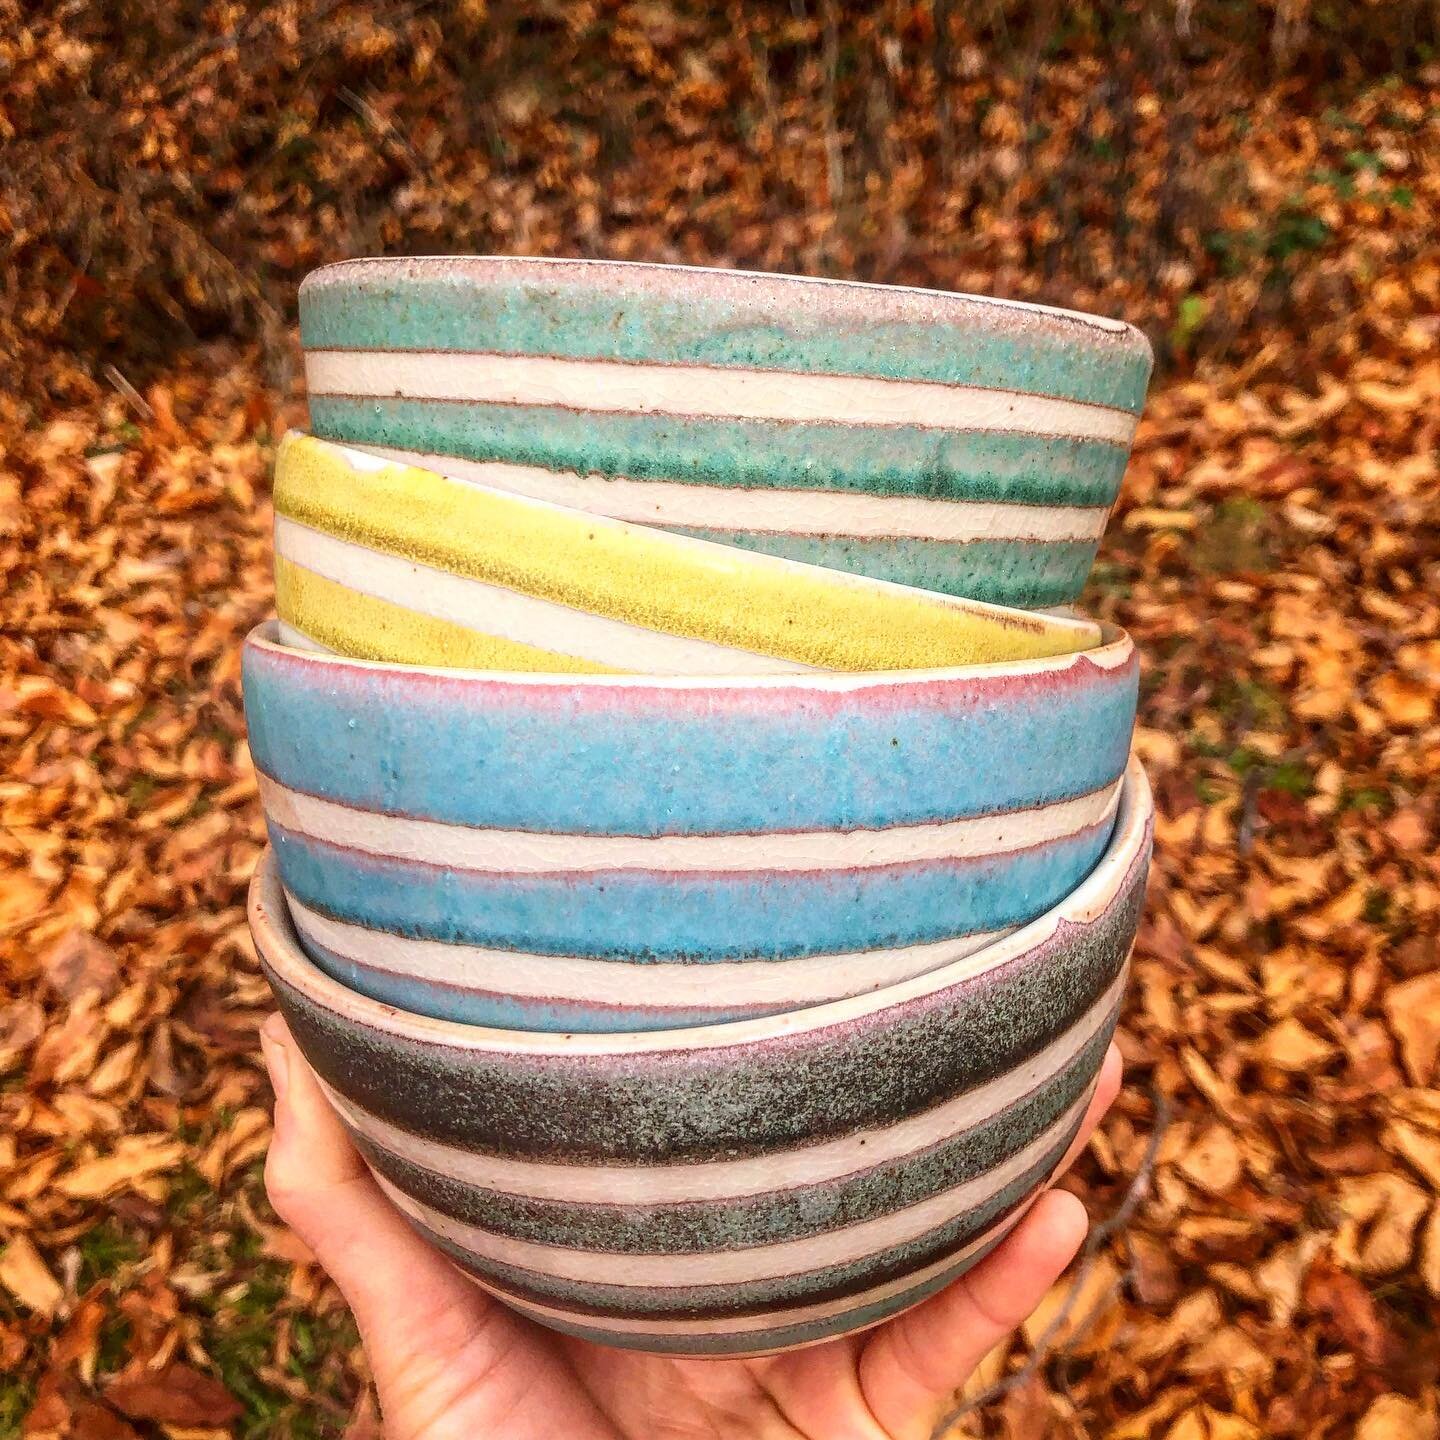 Stripey stackers 🥳

Pots are piling up for the @marshallhandmademarket next weekend! November 19 + 20, 10am - 5pm. Come if you can!

#ncpottery#smallbatch#stripes#joyfulhome#apotterslife#joyfullife#studiopottery#thismagicallife#handmadelife#claylove